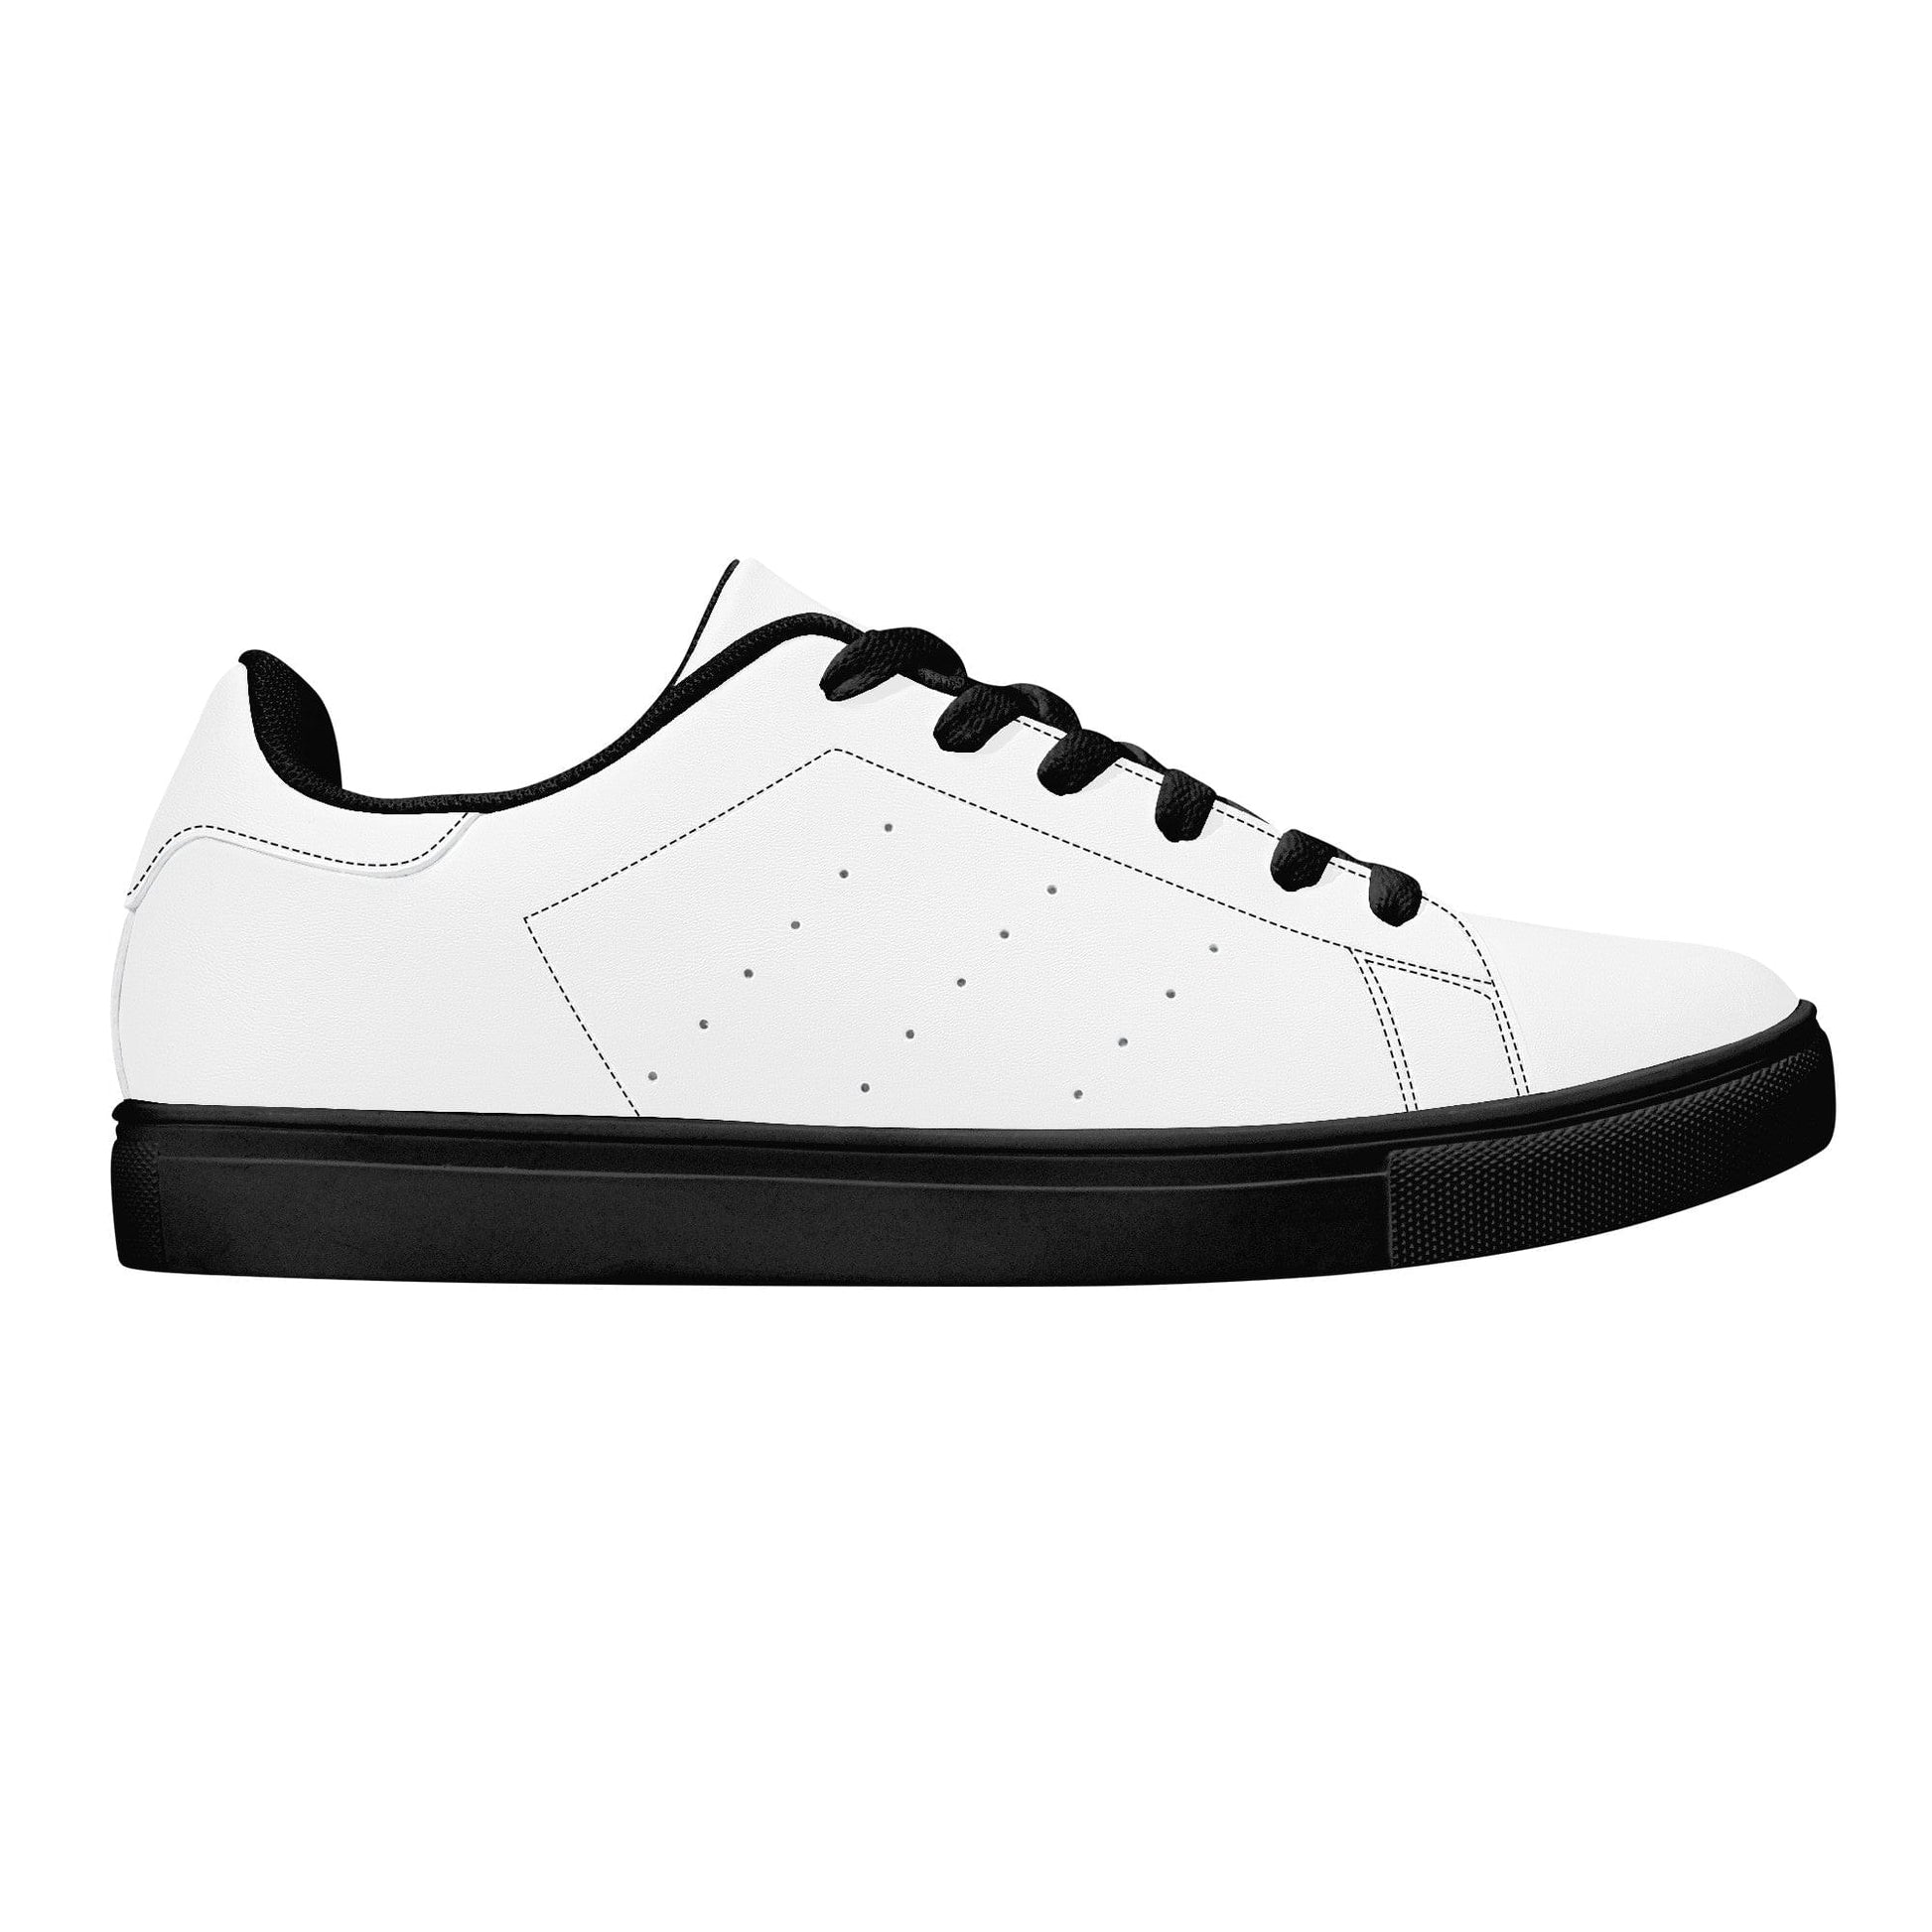 Custom Low Top Leather Sneakers -Black D27 Colloid Colors 